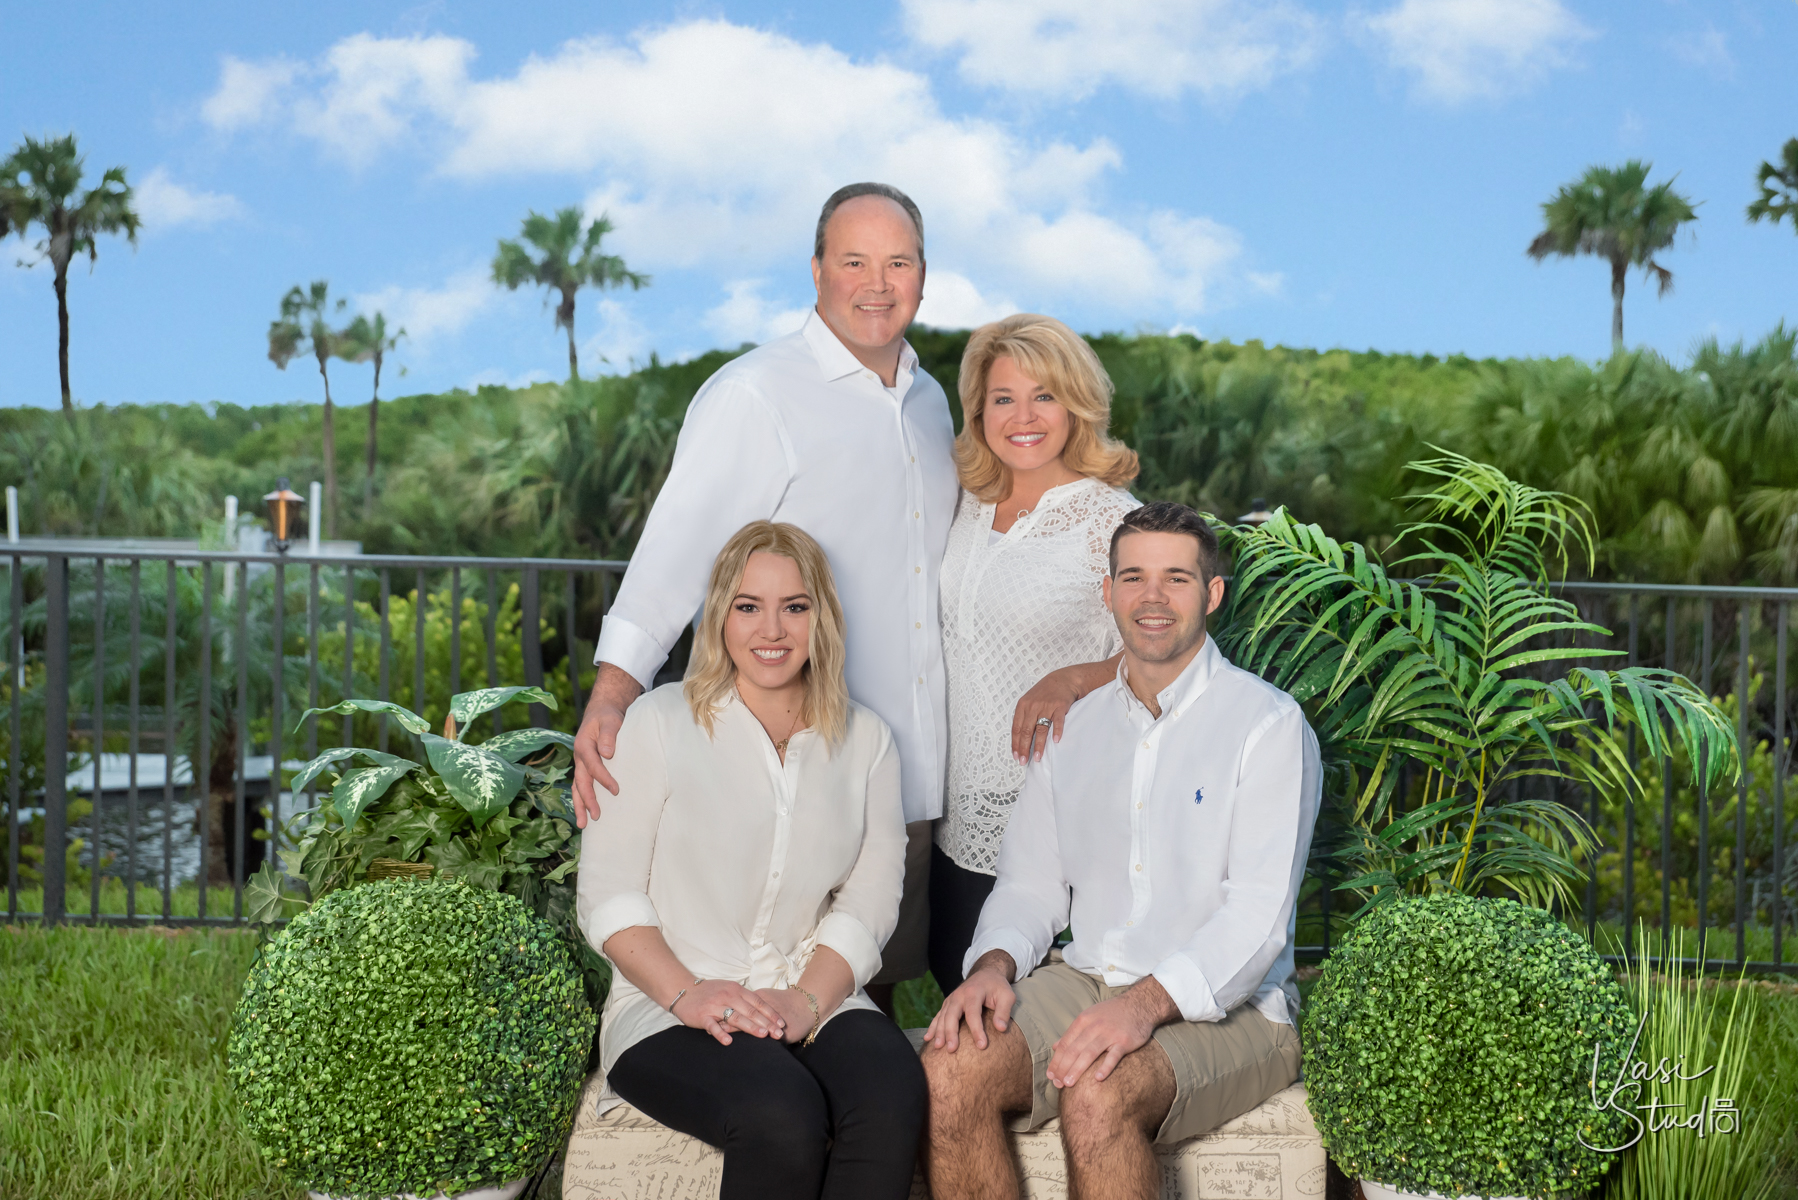 South Florida family photographer. Call us today at (561) 307-9875.